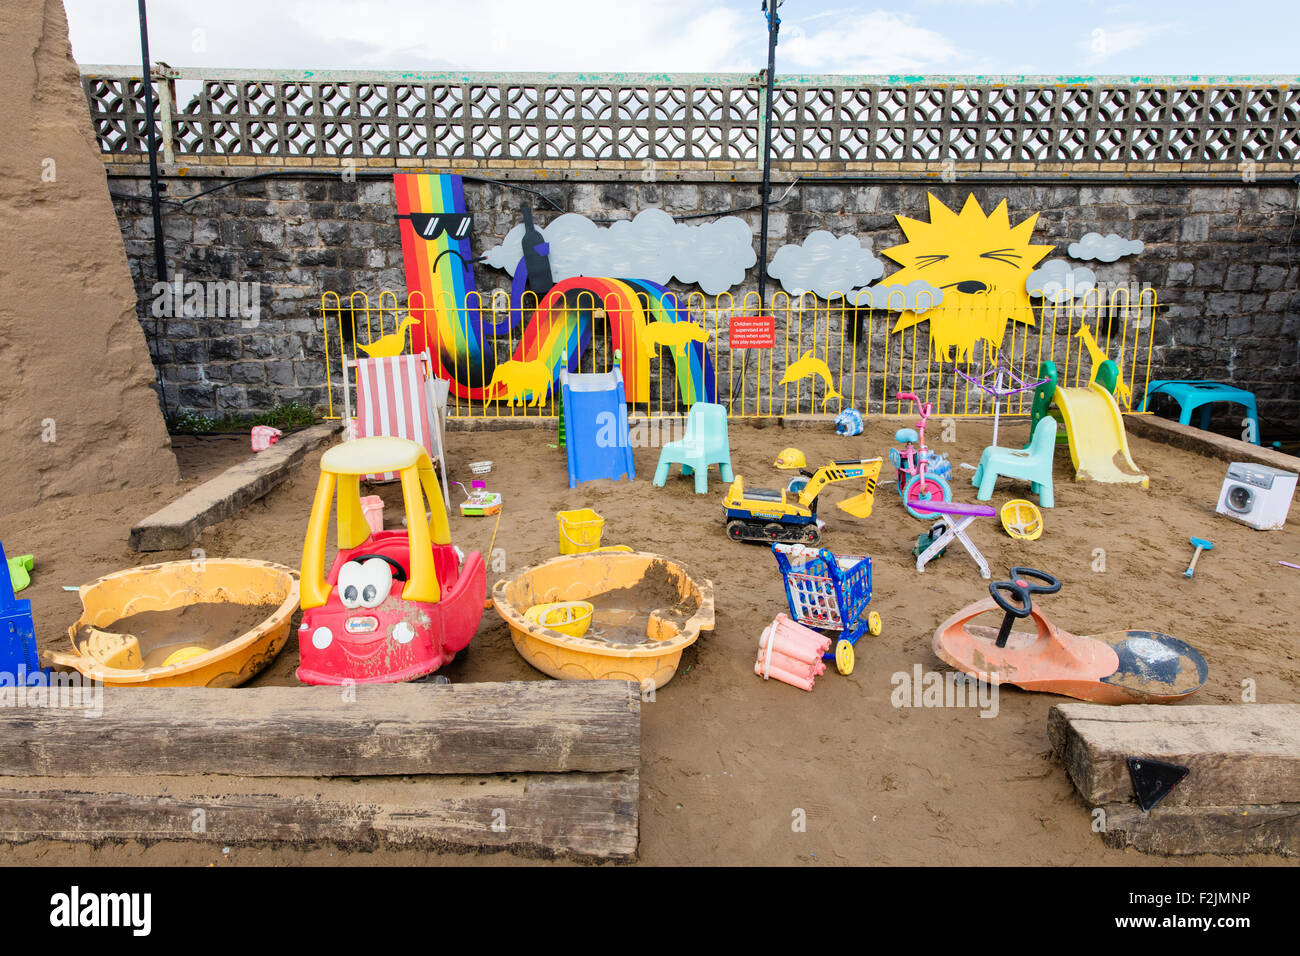 Kids sandpit corner at Banksy's Dismaland in Weston super Mare UK with a selection of rundown children's toys and playthings Stock Photo